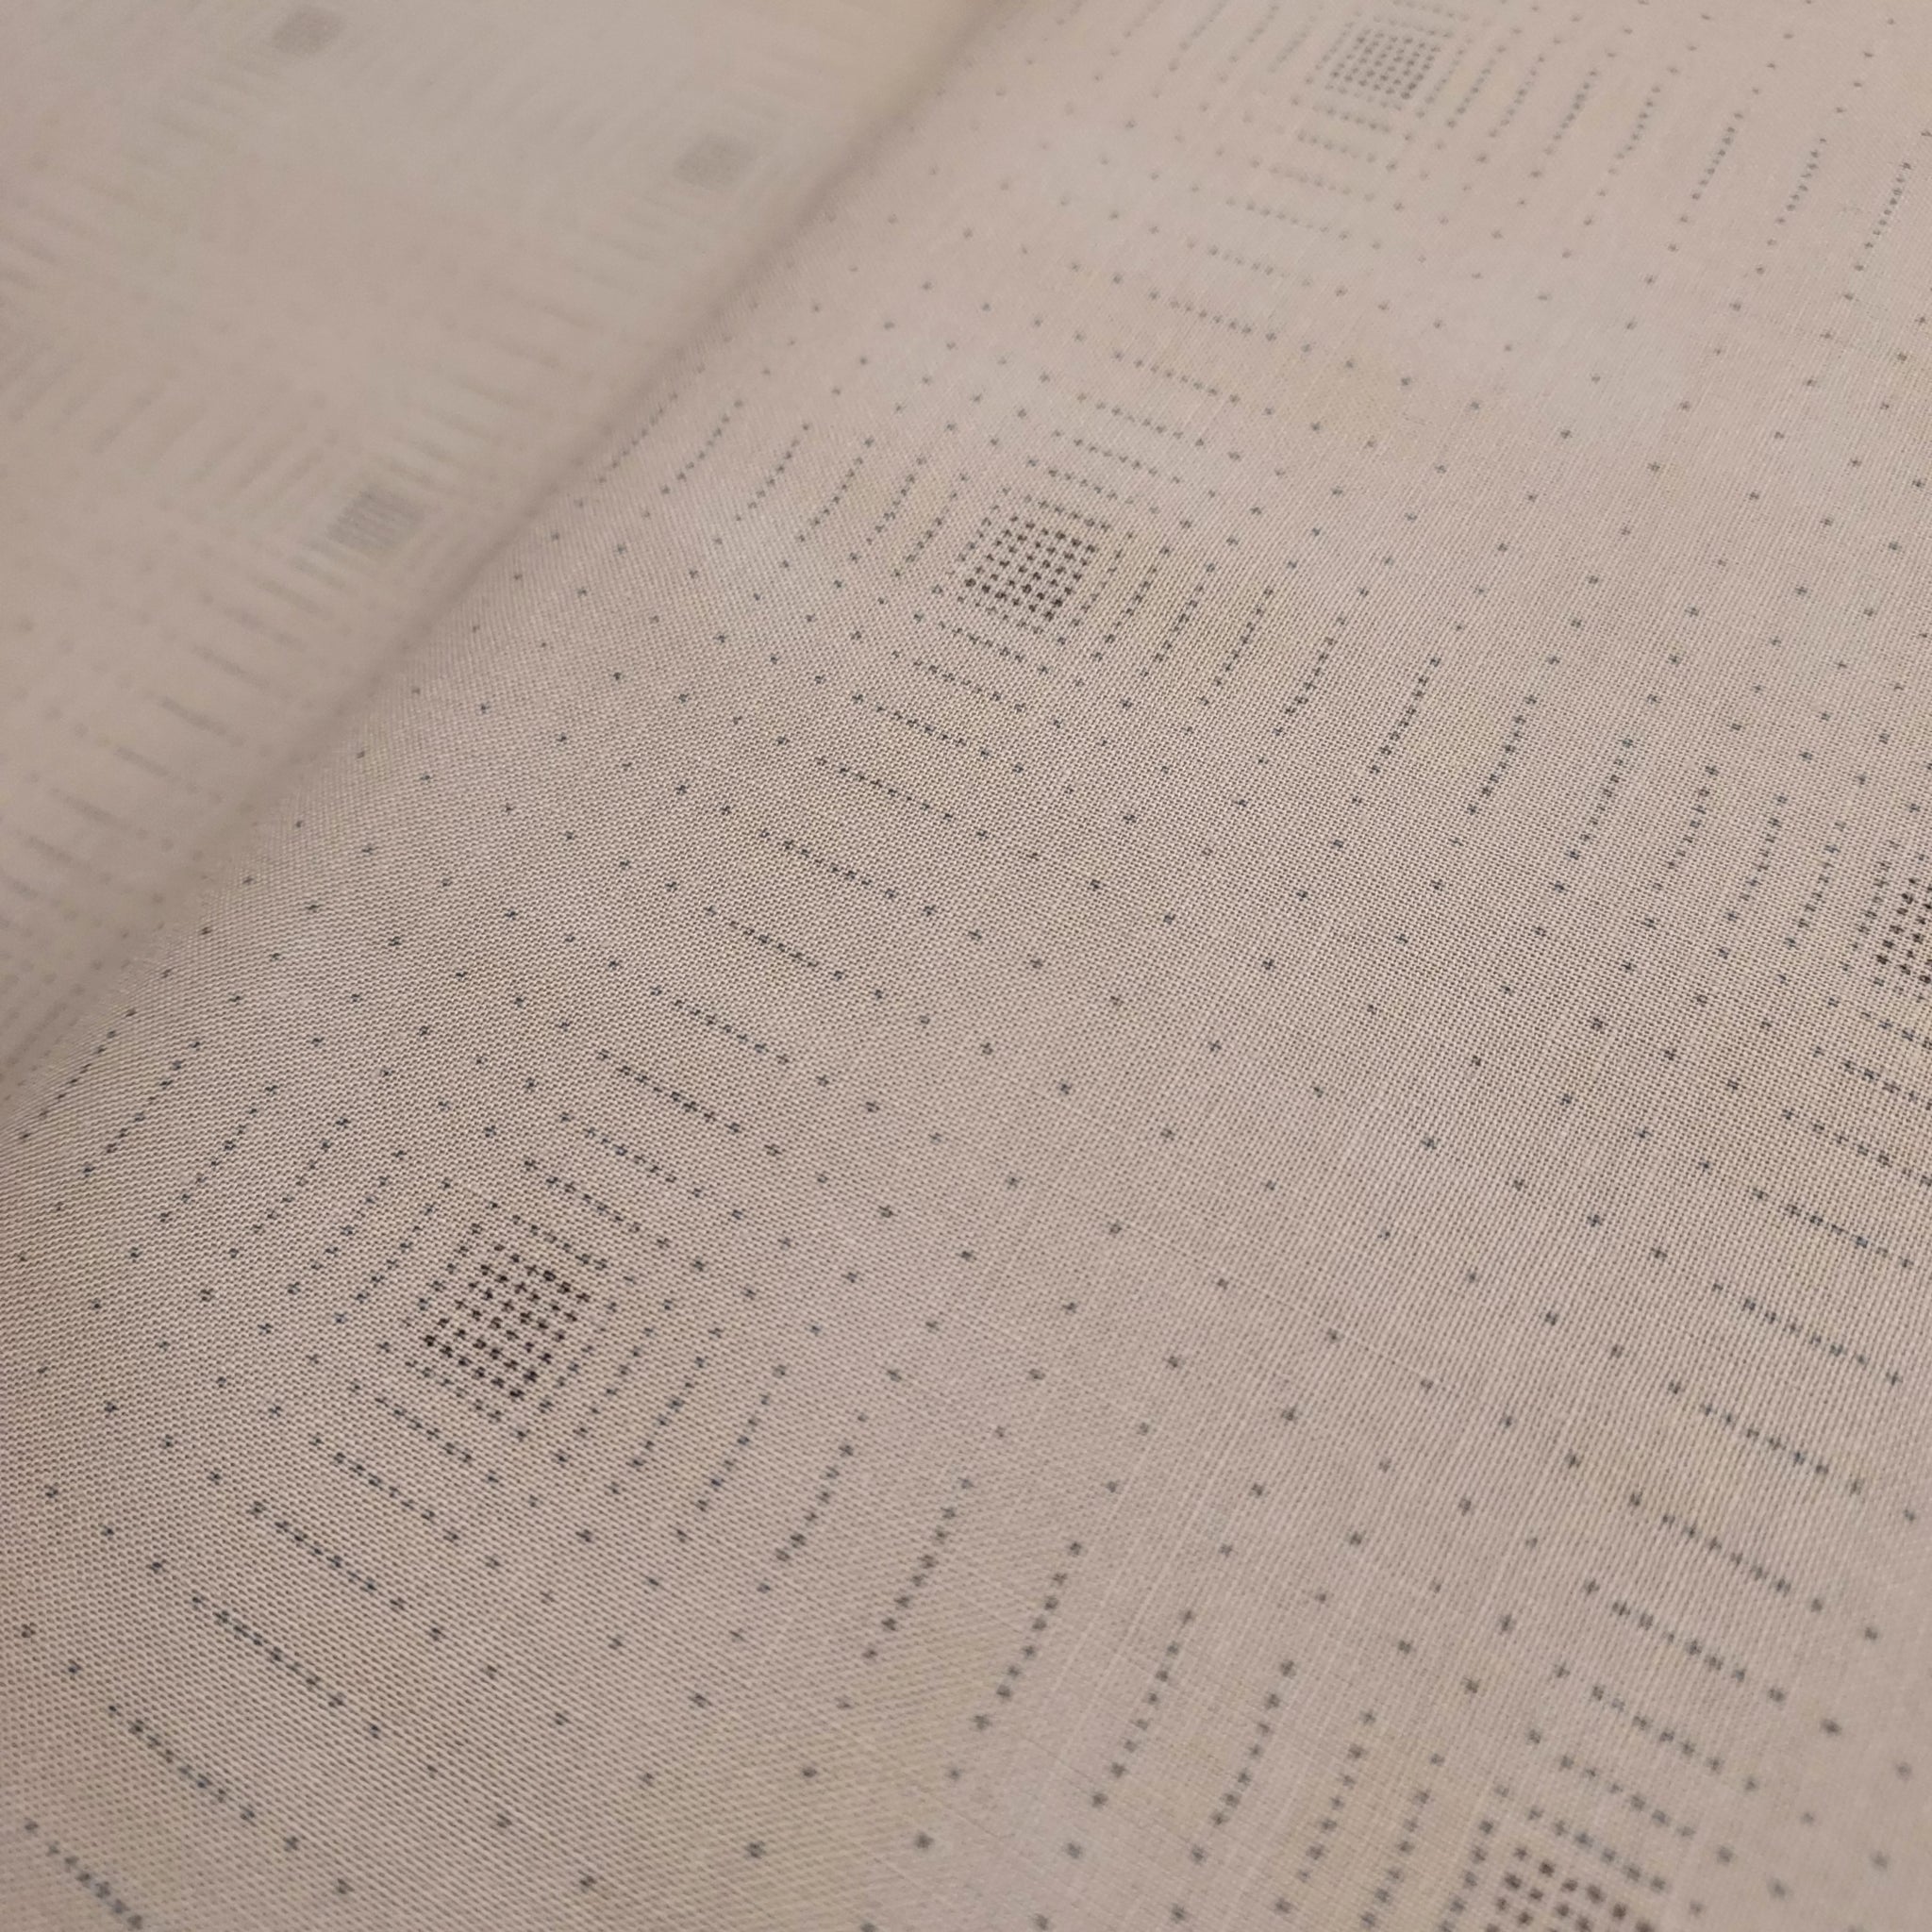 This beautiful cotton fabric is made in Japan. Soft hand and lightweight feel, this fabric has dark brown dots all over the fabric that form a grid. These dots are in a square cluster and disperse throughout. The tiny dots are over a taupe background. This fabric is beautiful and would be suitable for quilting or apparel sewing. 